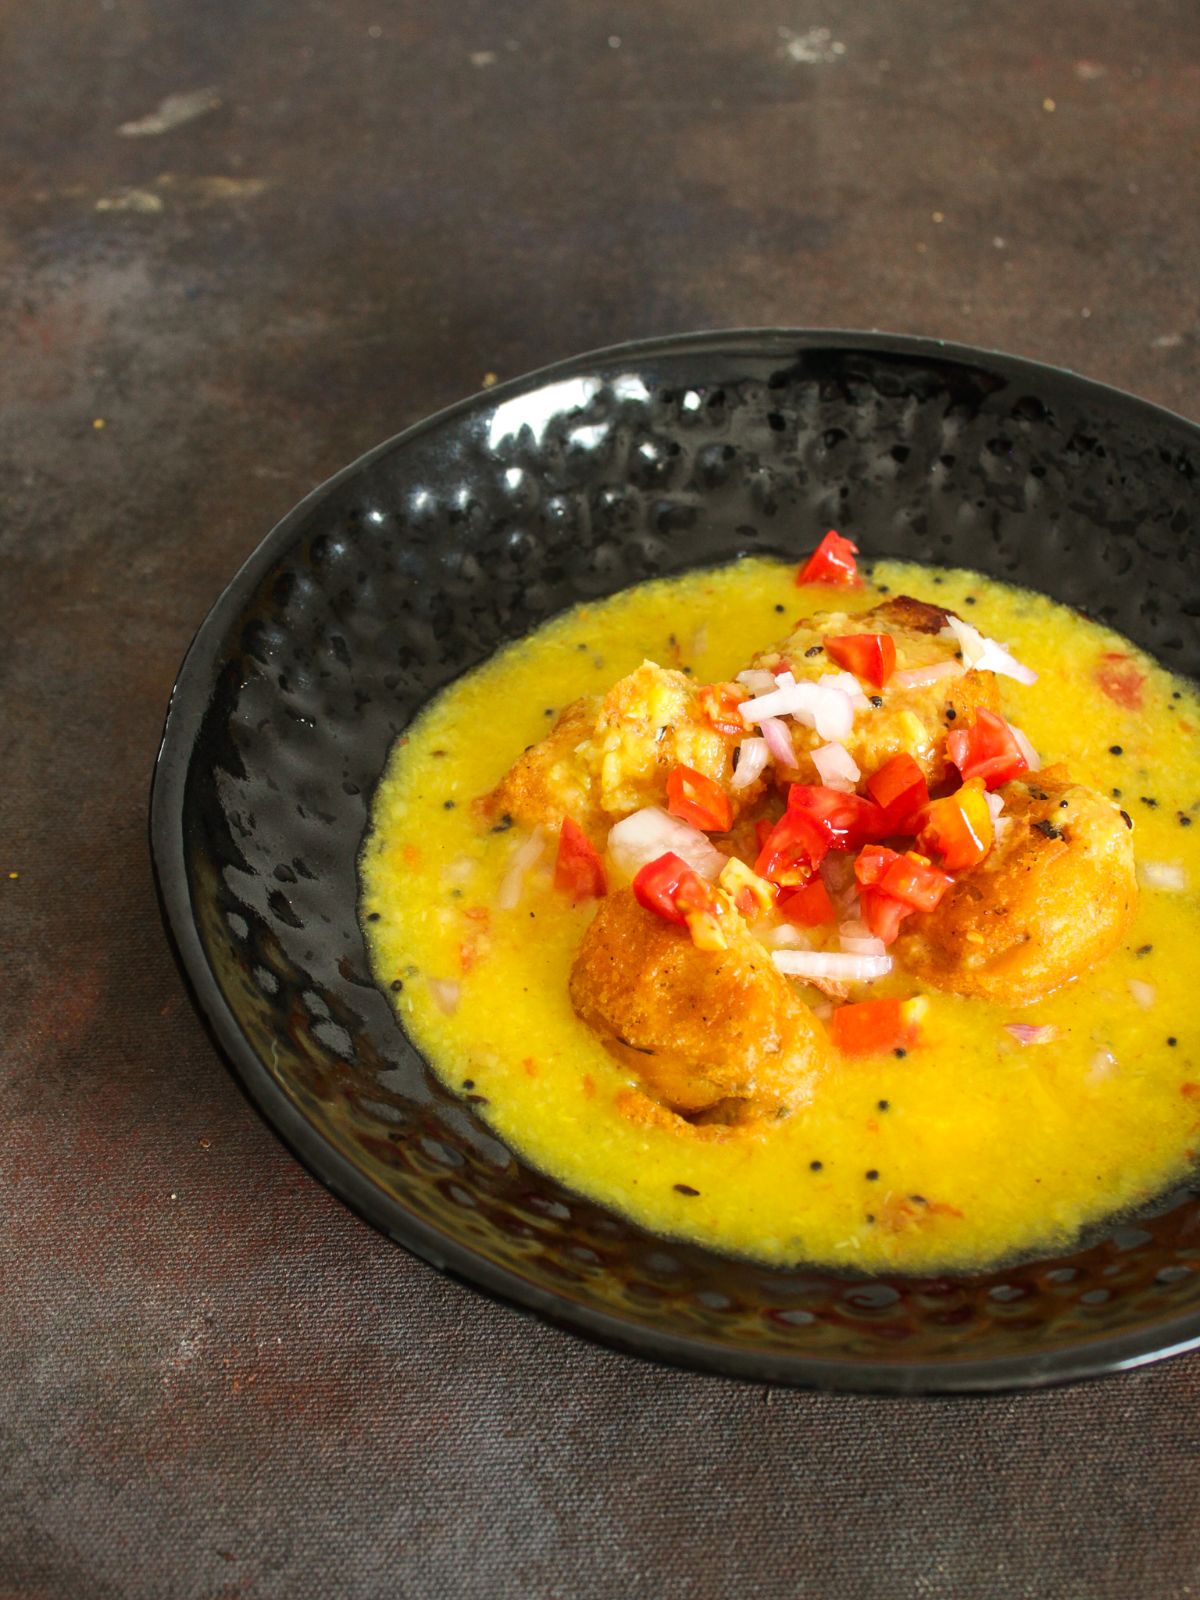 Tomatoes and onions on top of yellow soup with fritters